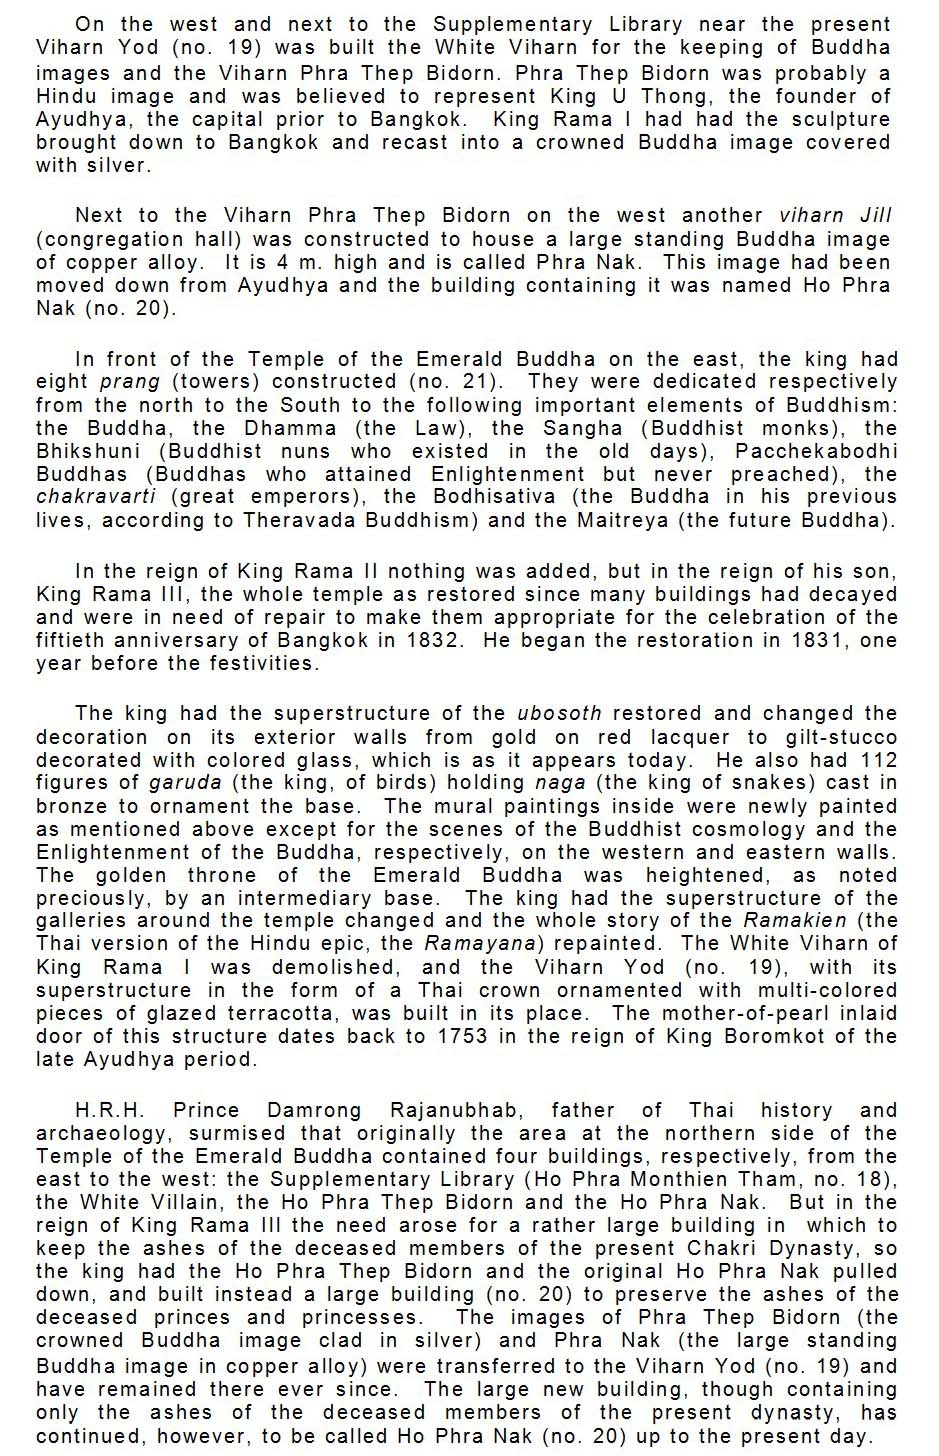 History of the Emerald Buddha page 6